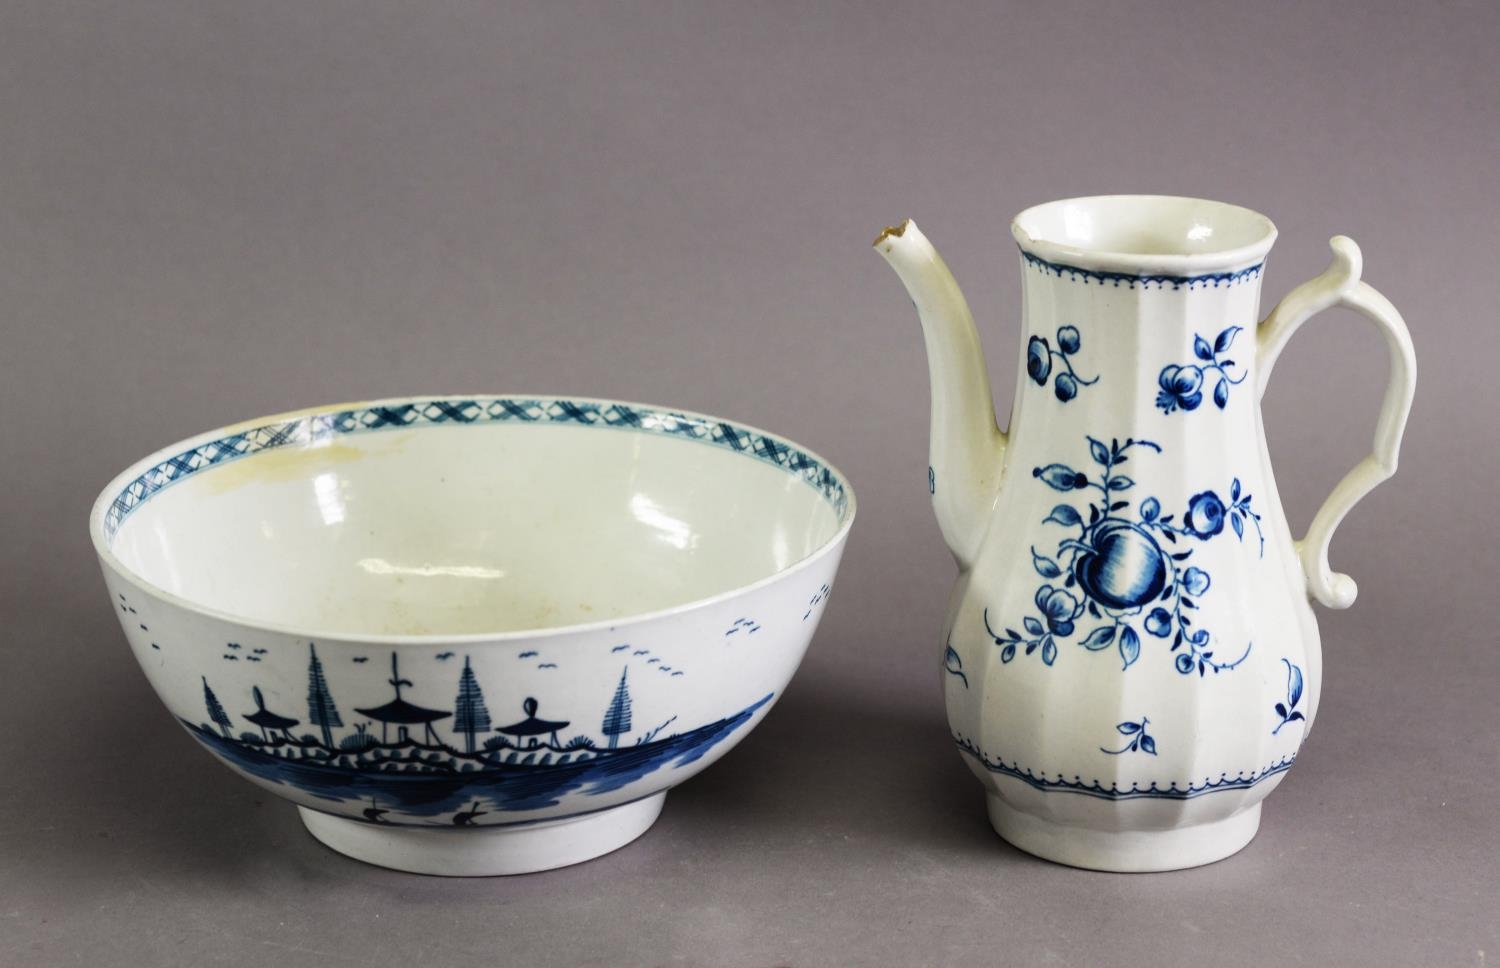 LATE 18TH CENTURY CAUGHLEY SOFT PASTE PORCELAIN SERVING BOWL, decorated in chinoiseries and skeins - Image 3 of 3